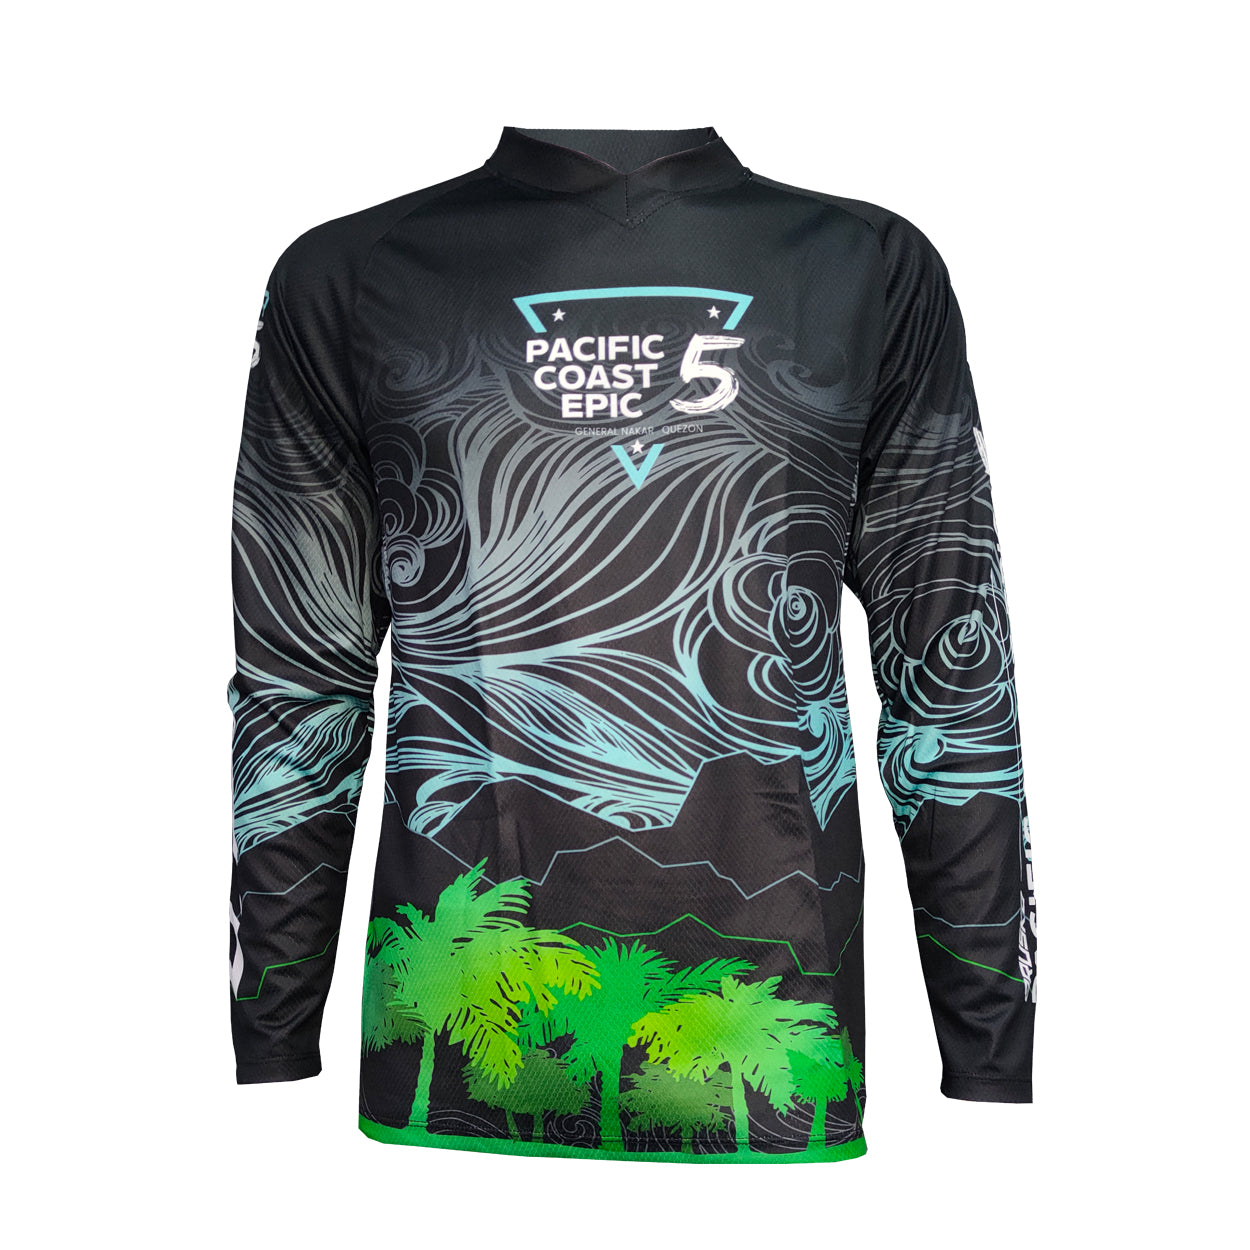 5th Brusko Pacific Coast Epic Limited Edition Technical Long Sleeves / Short Sleeves Jersey